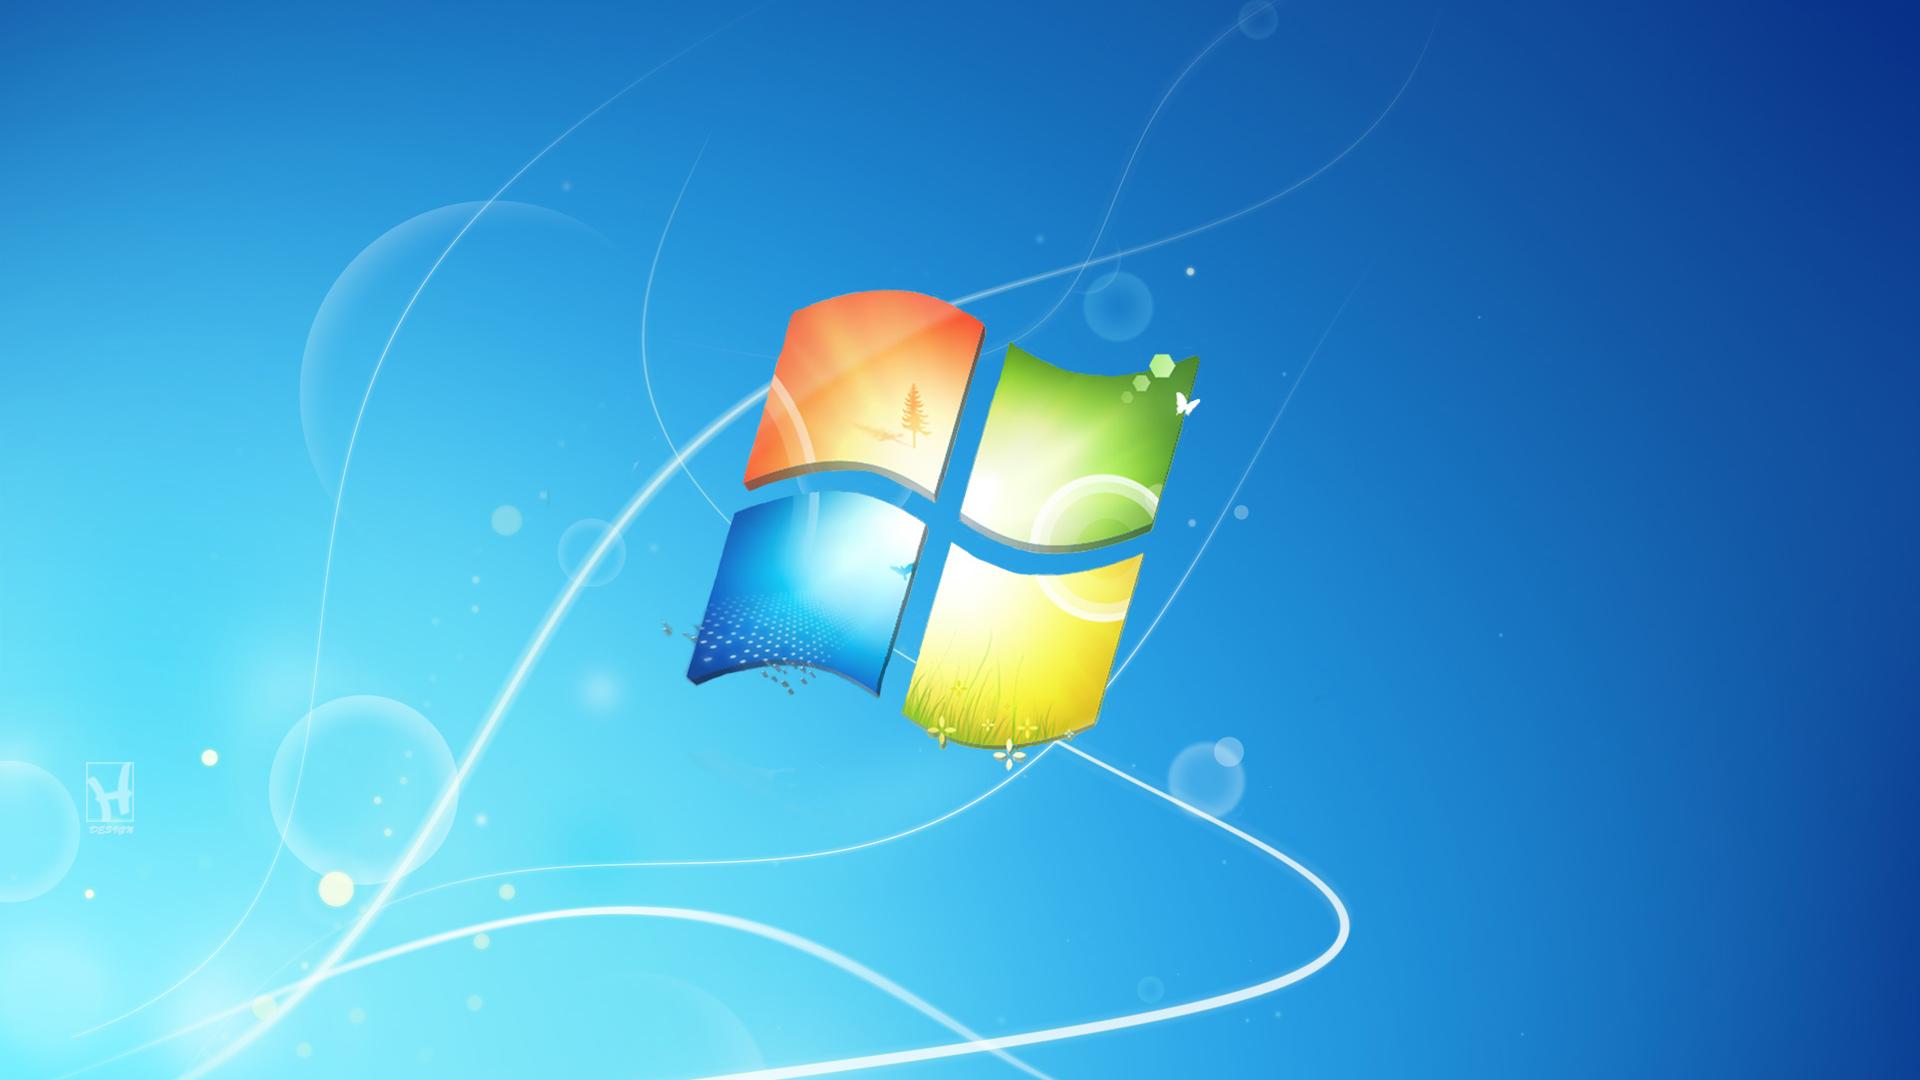 Background Blue Windows System Wallpaper Background Cool